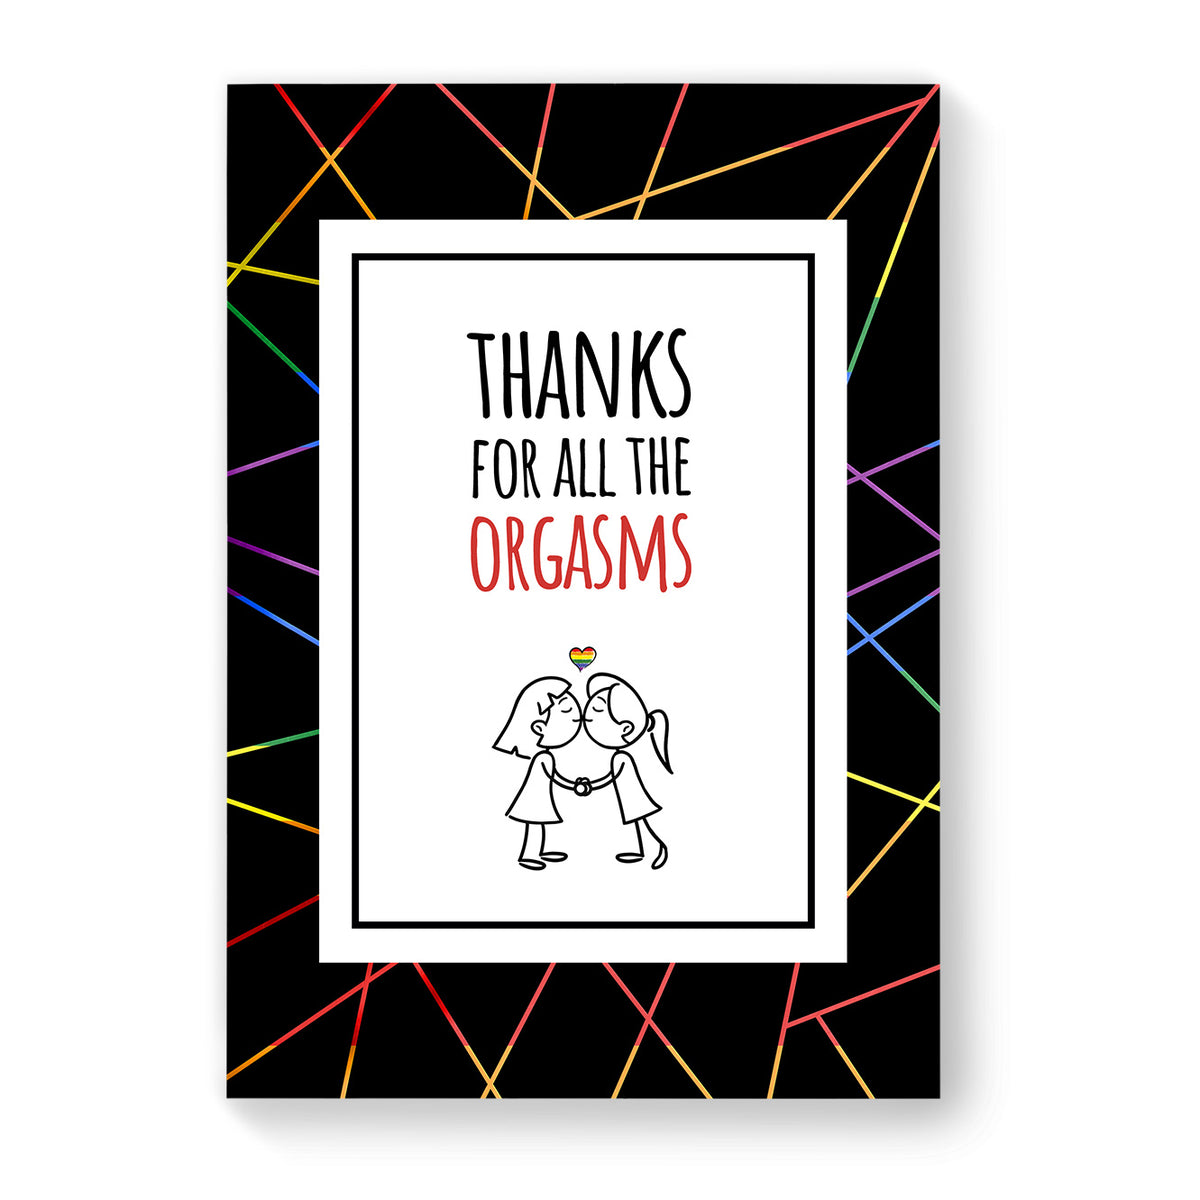 Thanks for all the Orgasms - Lesbian Gay Couple Card - Black Geometric | Gift